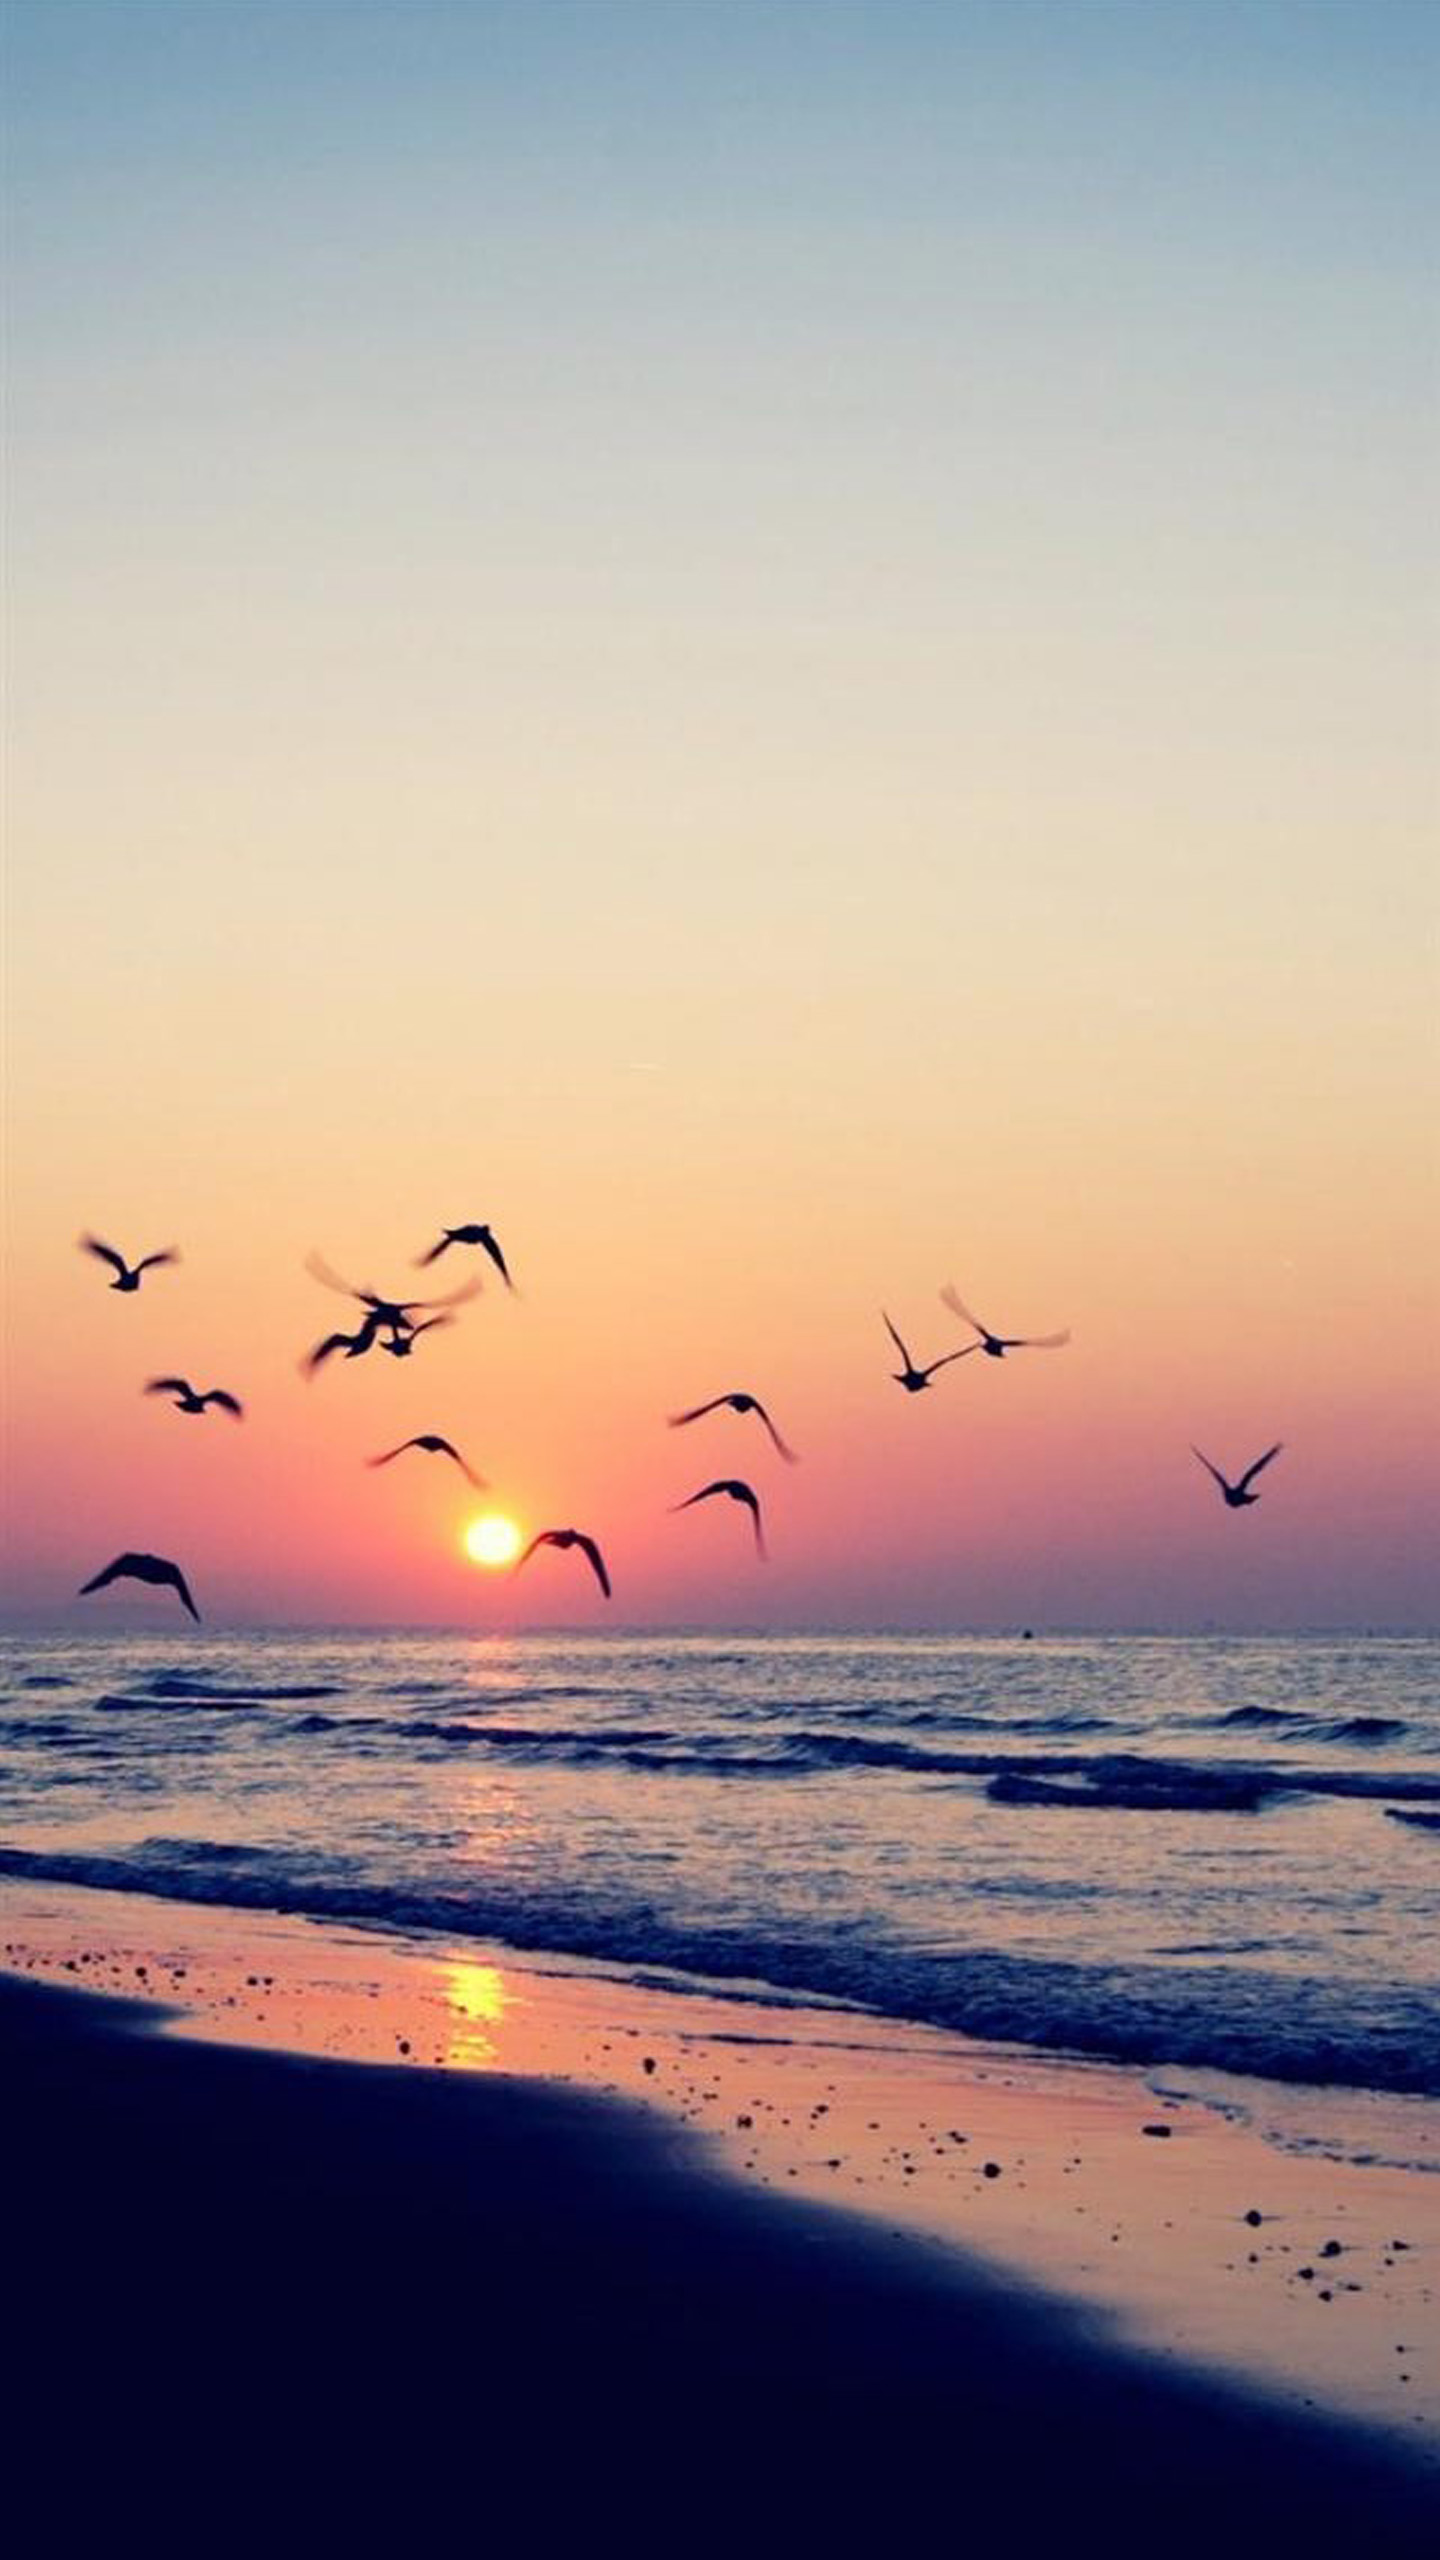 Sunset Seagull Nexus 6 Wallpapers, Nexus 6 wallpapers and Backgrounds